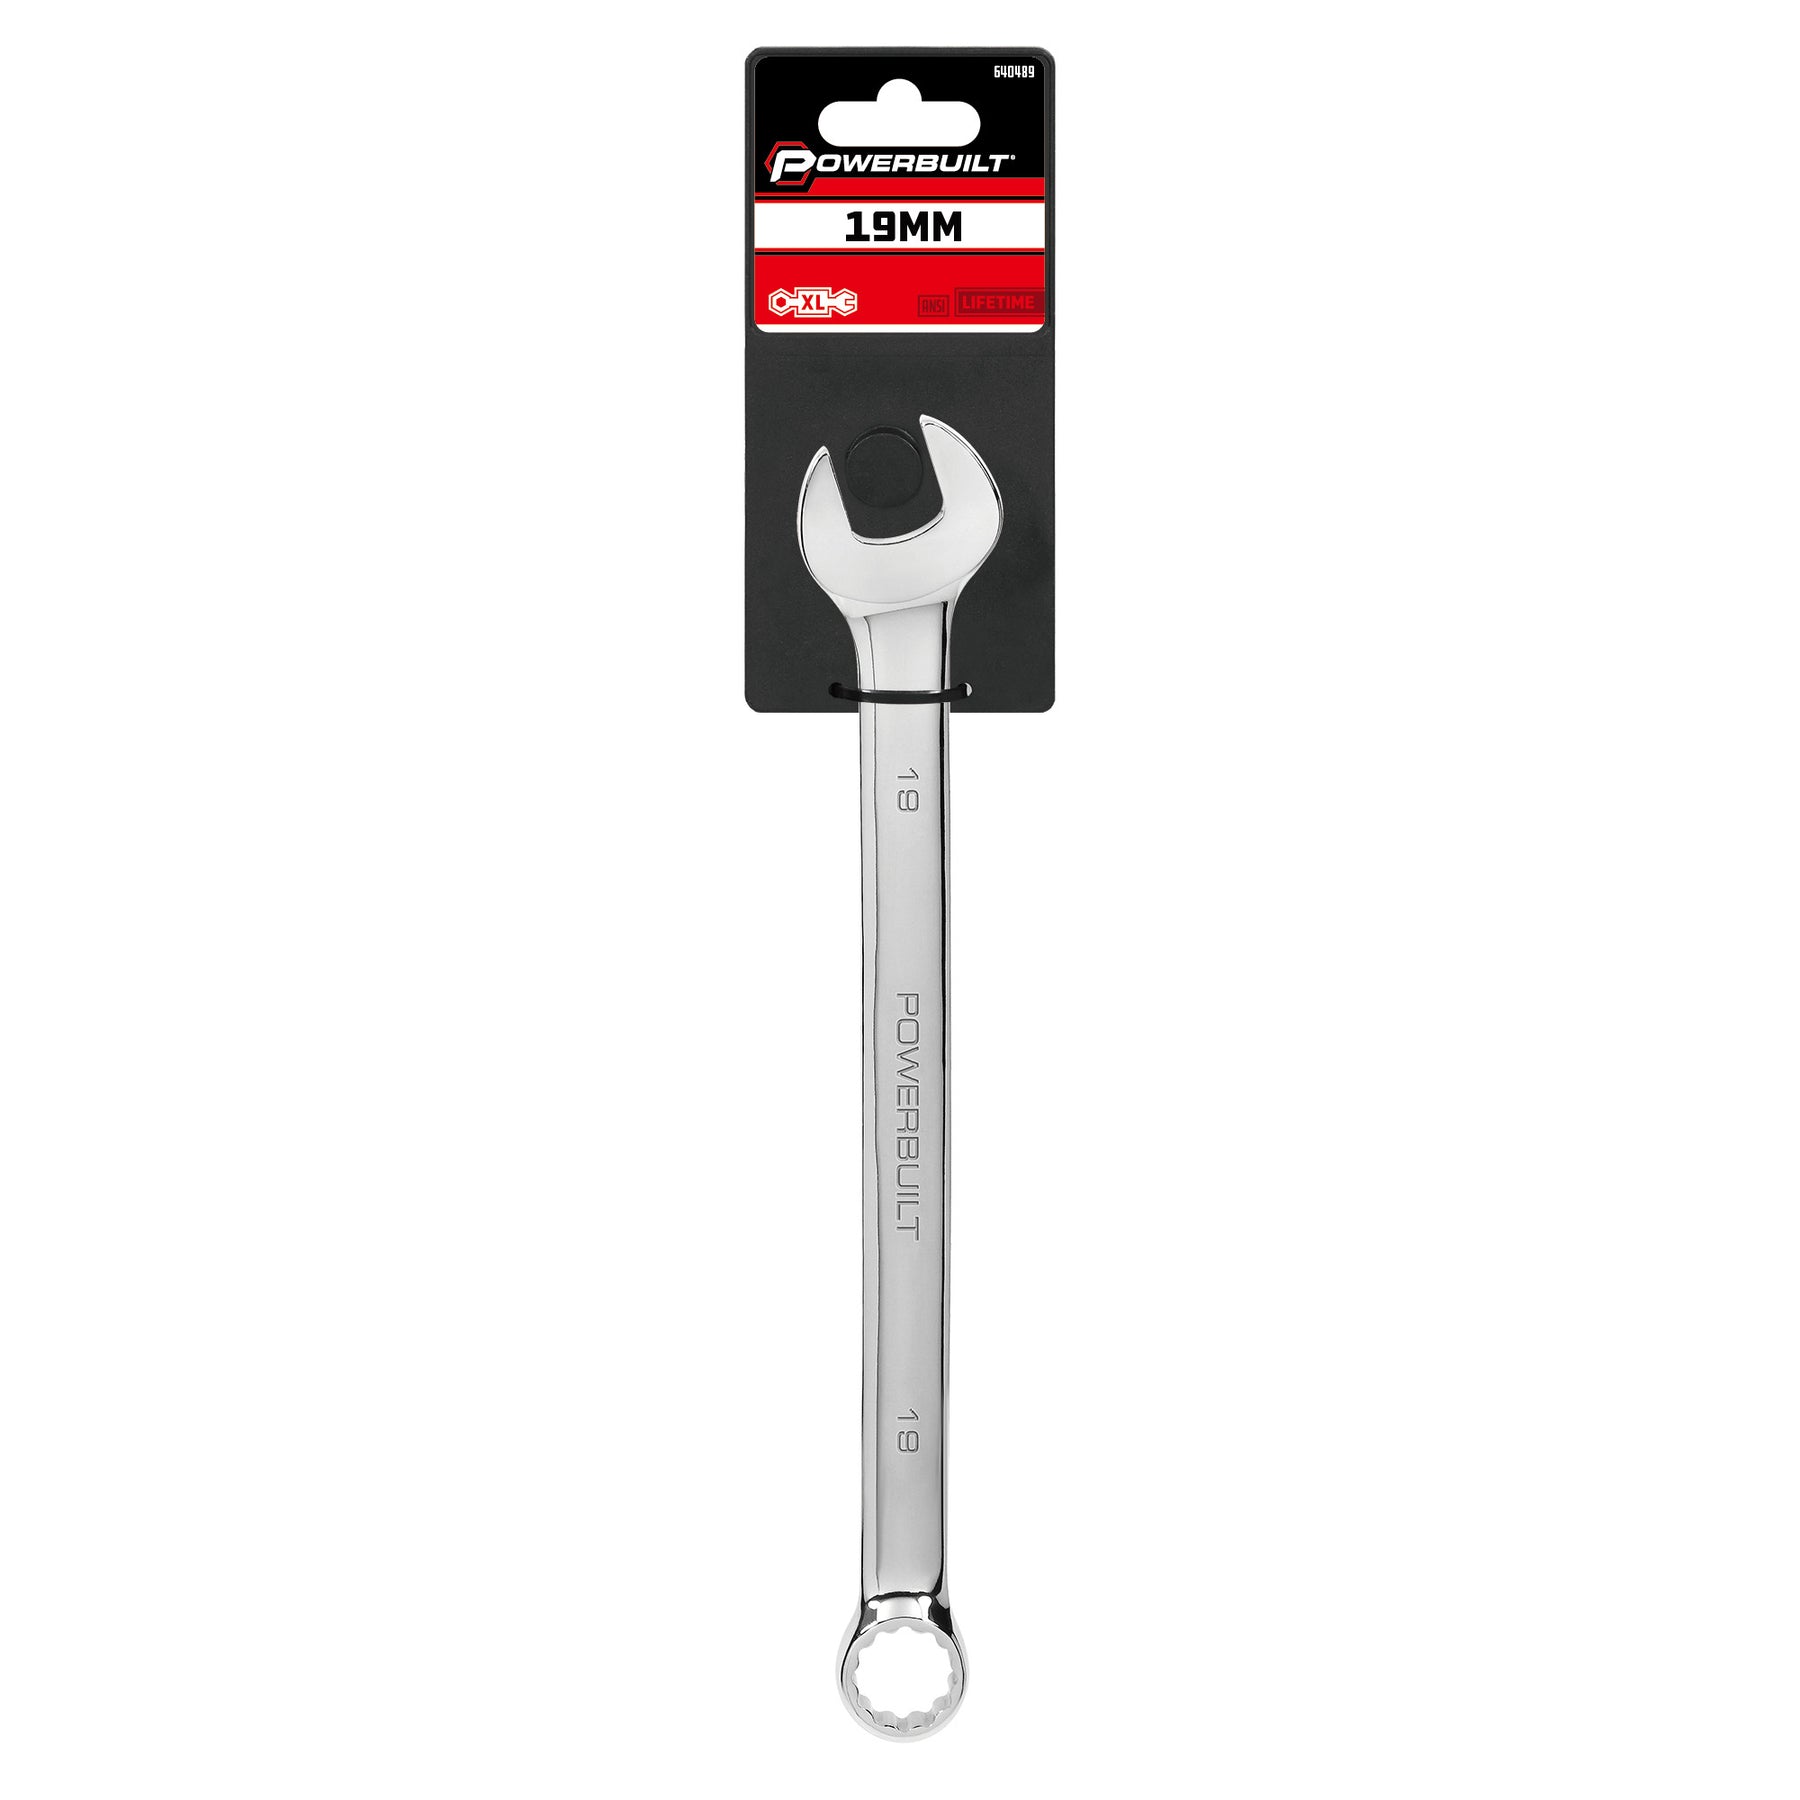 19 MM Fully Polished Long Pattern Metric Combination Wrench